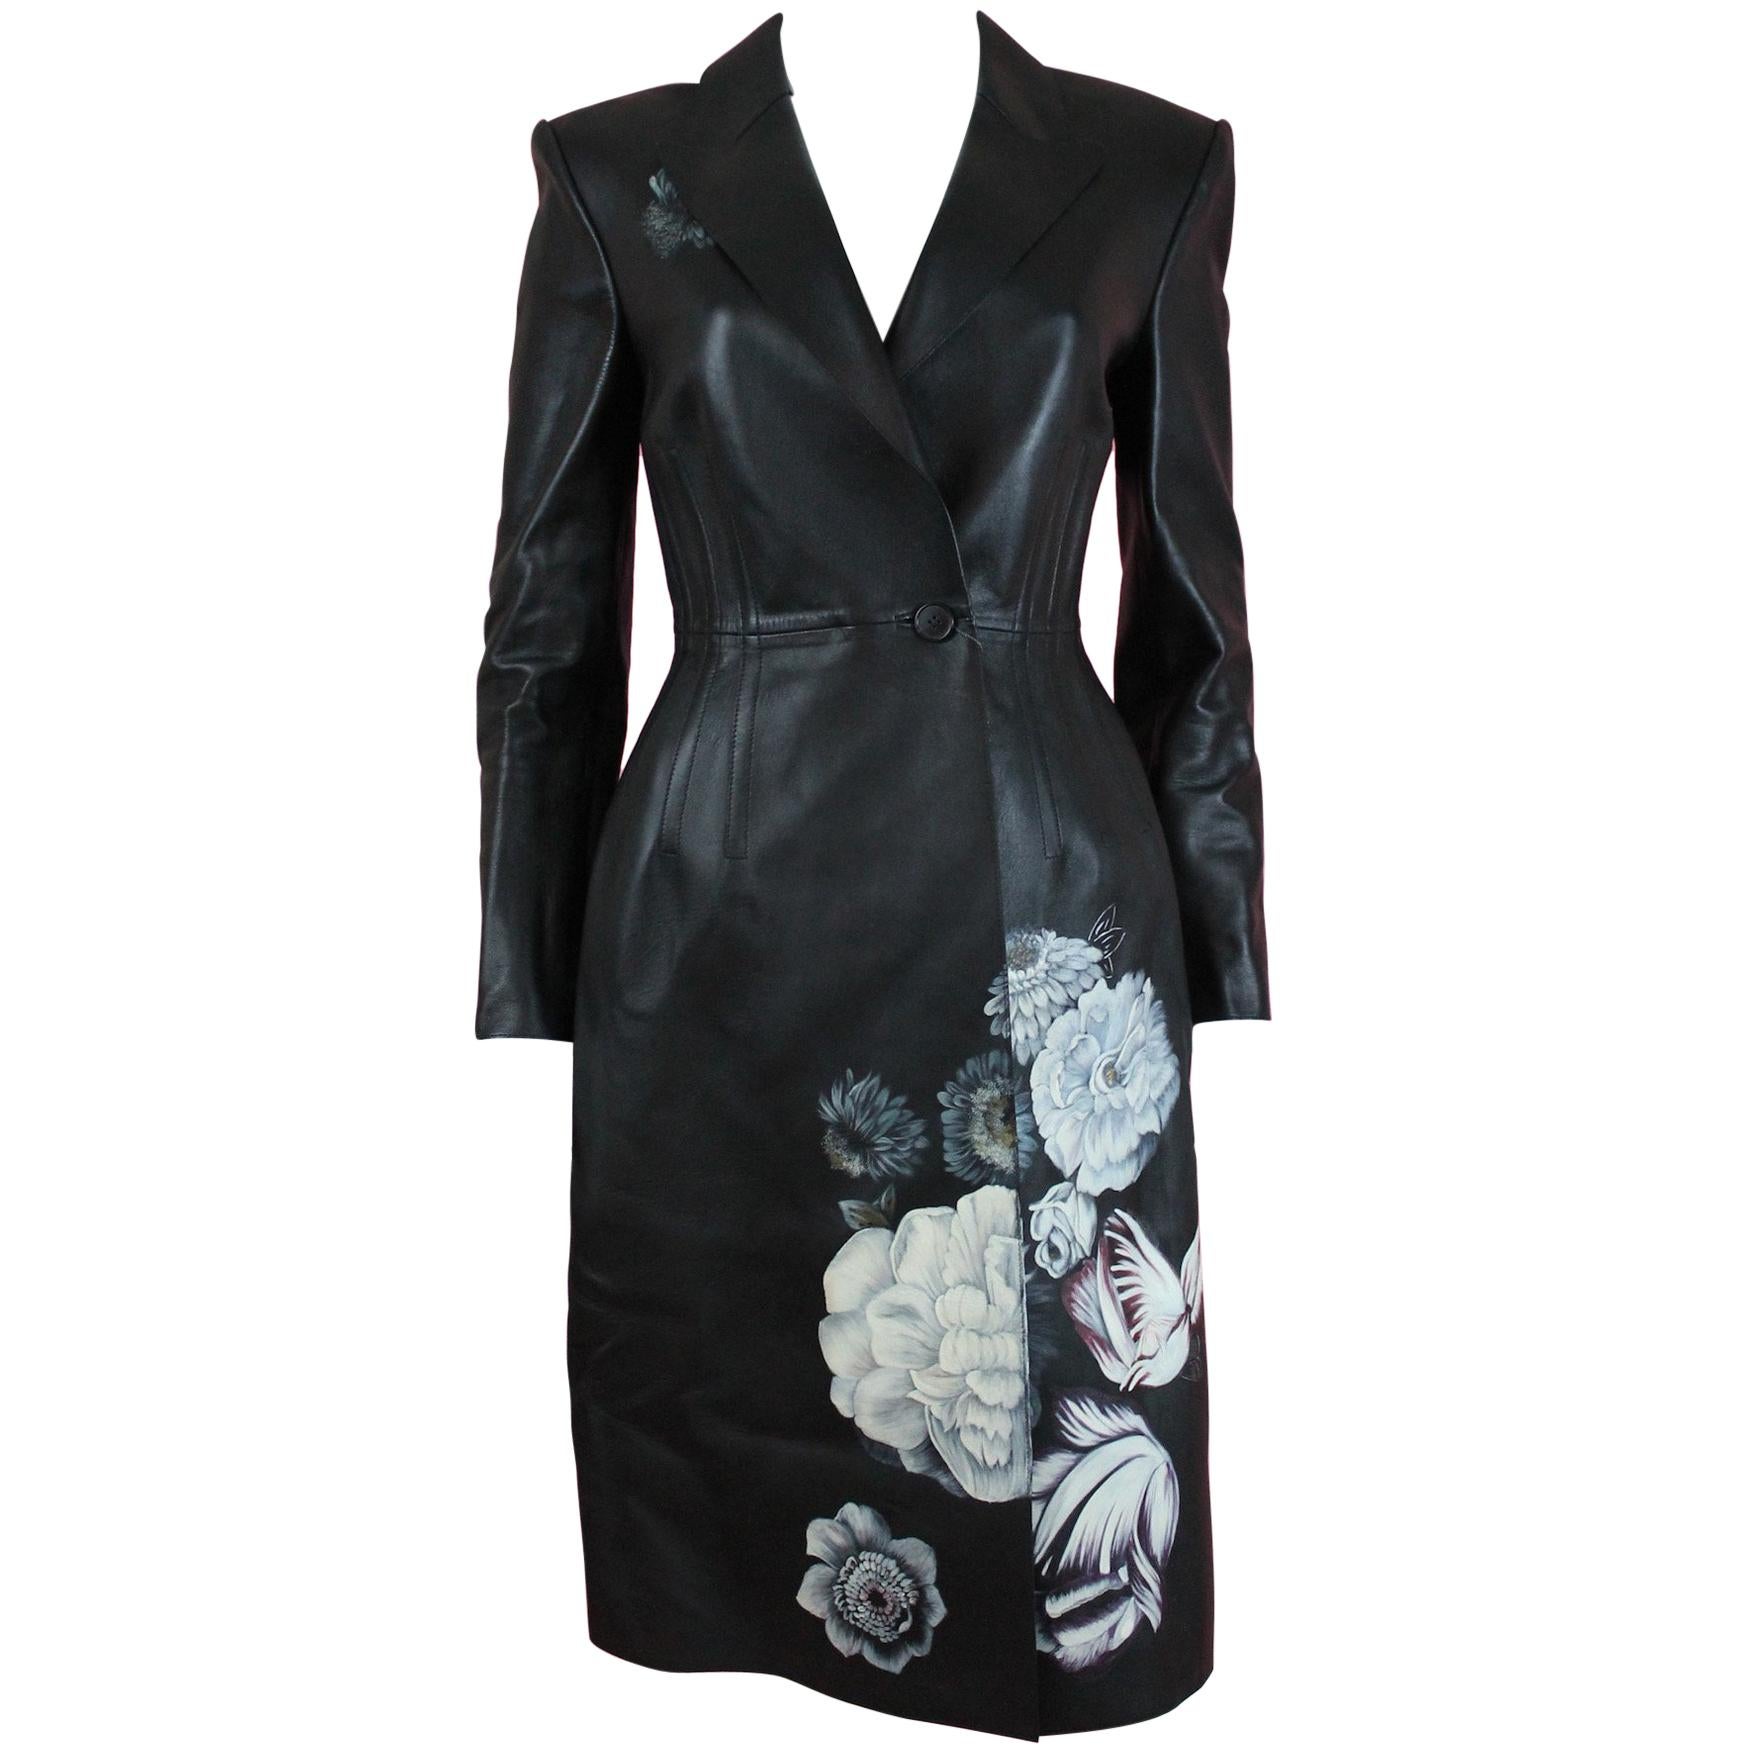 Alexander McQueen Black Lamb Leather Coat with Hand-painted Flowers, AW 16 For Sale